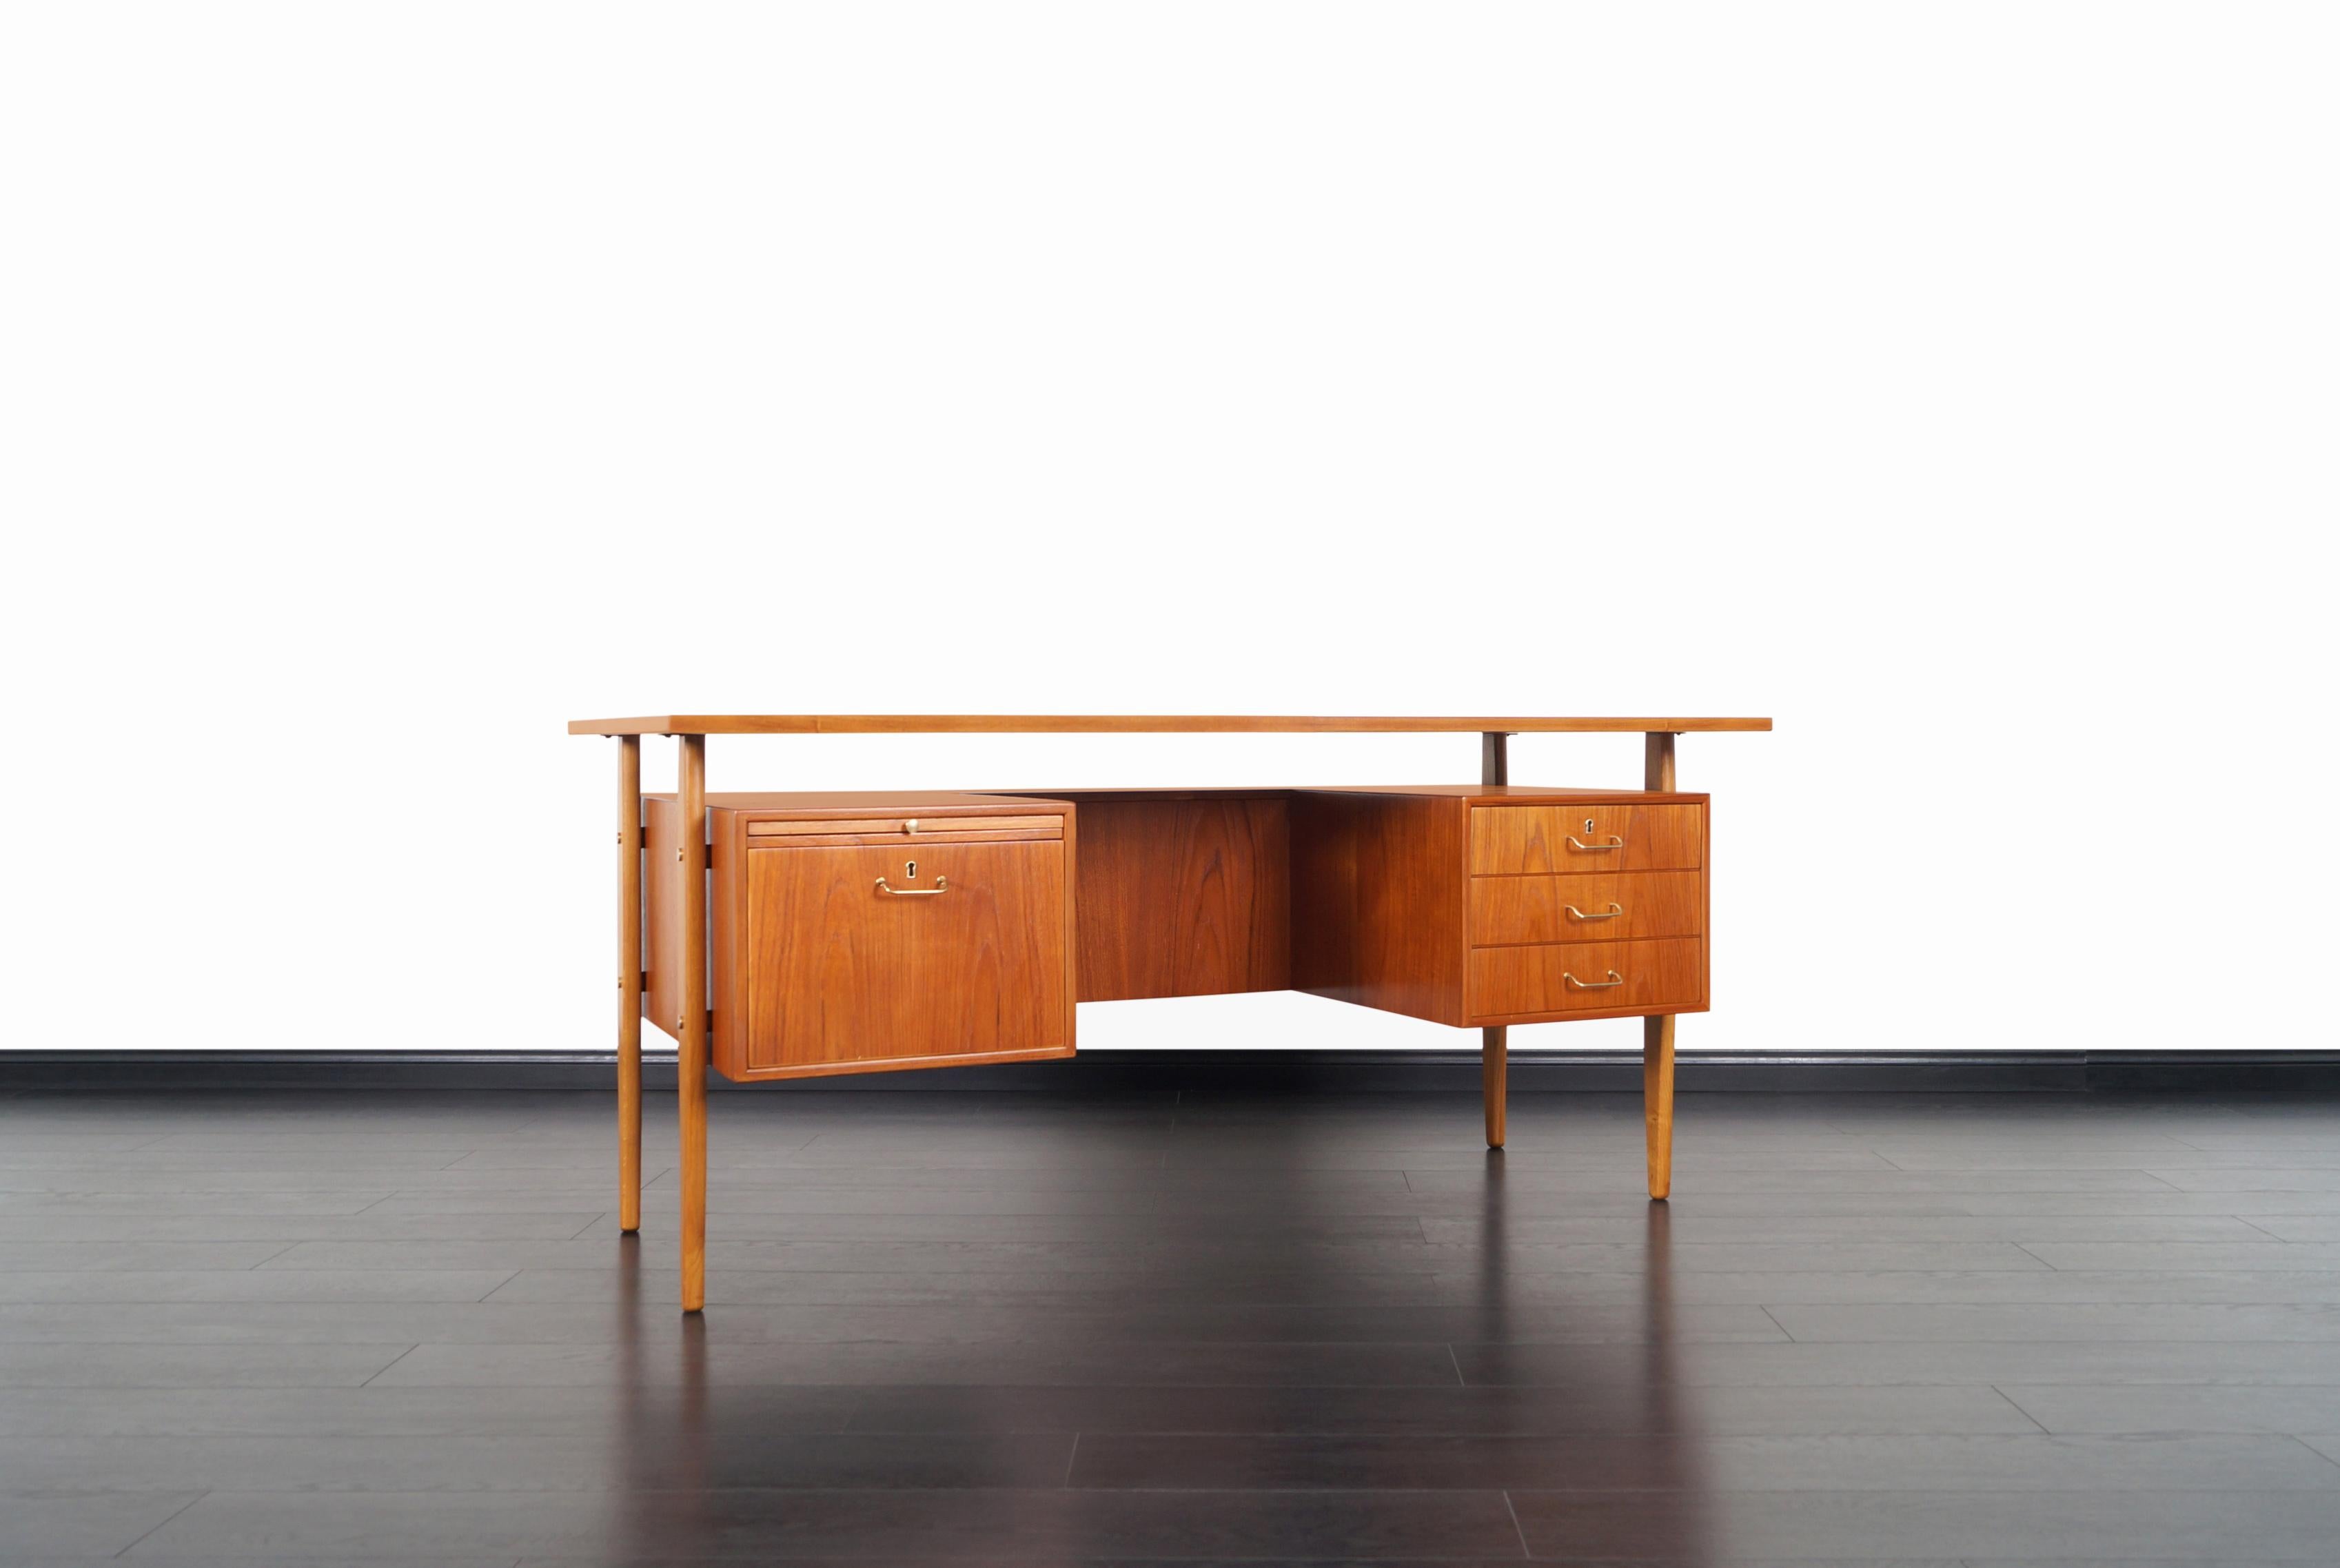 Amazing Danish modern teak desk designed by Torben Strandgaard for Falster Møbelfabrik. Standing out by its design features a floating top design, it includes three drawers on the right side and a file drawer with a pull-out writing surface on the